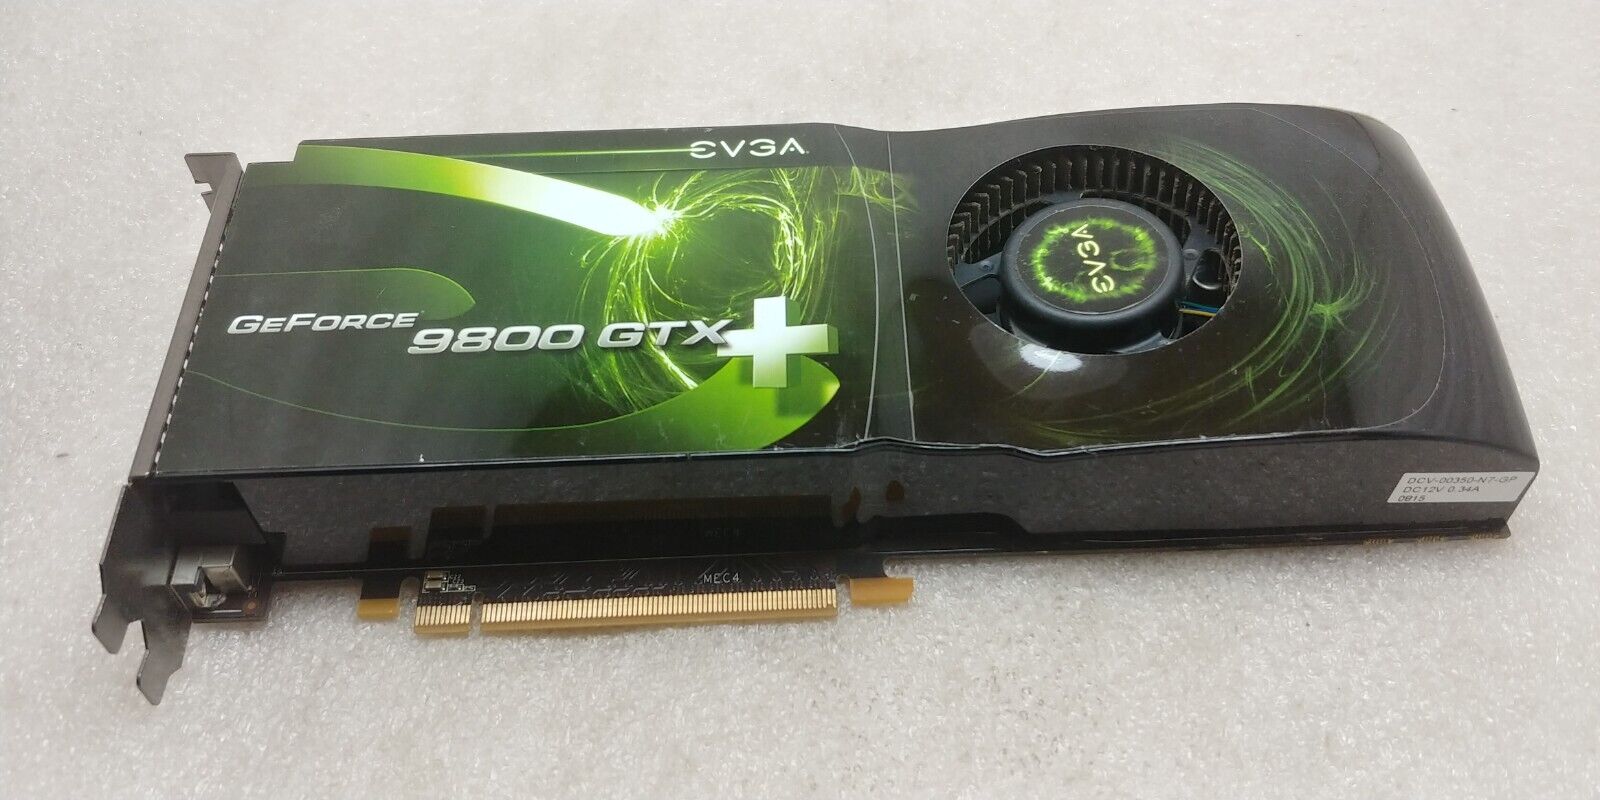 EVGA NVIDIA GeForce 9800 GTX PLUS Graphics Card GREAT CONDITION 